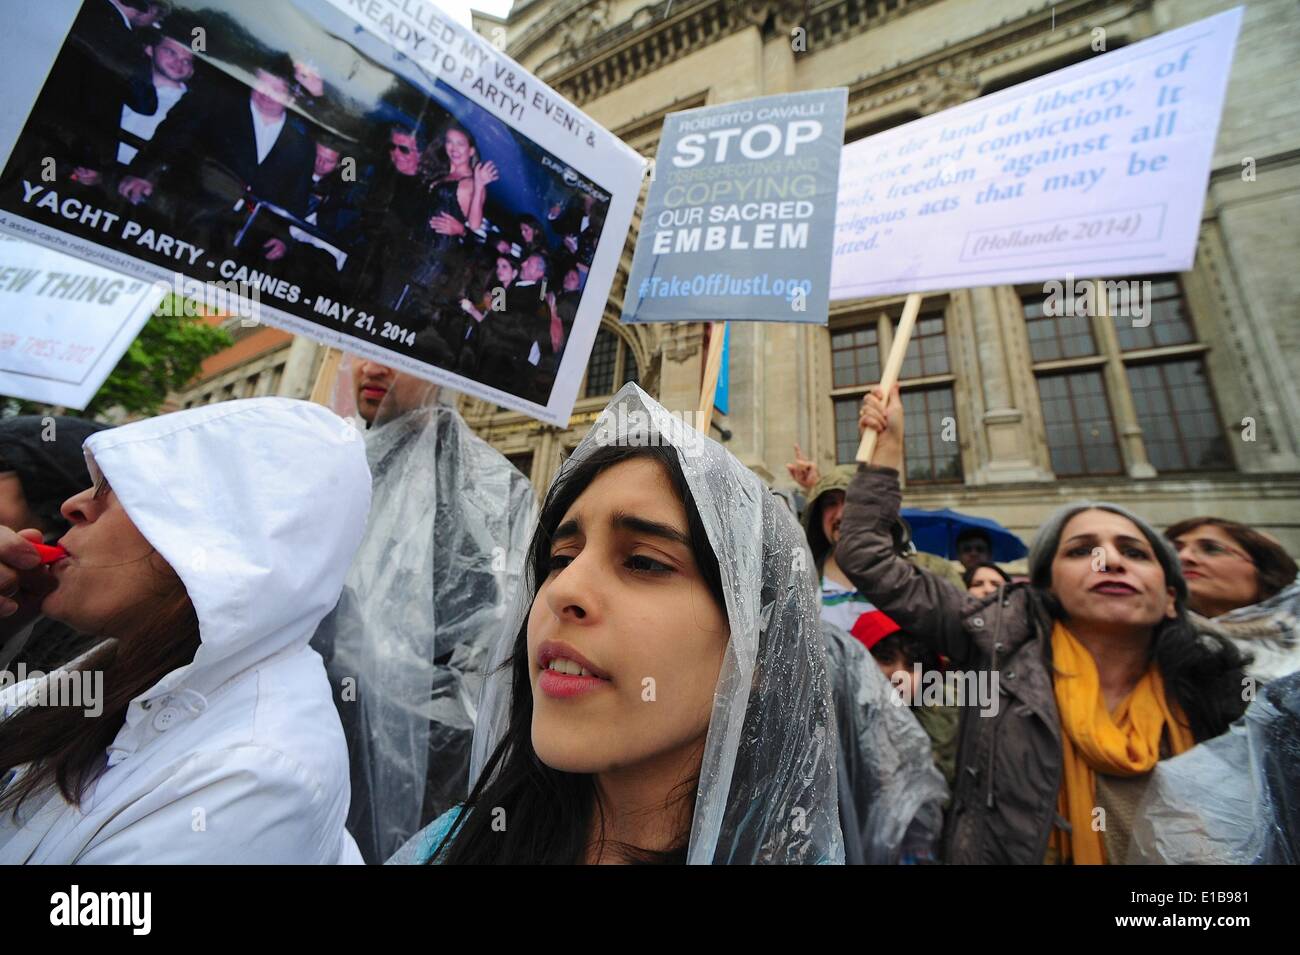 London, United KIngdom, UK. 29th May, 2014. Sufi students and their supporters protested in front of The Victoria and Albert Museum where the designer had planned to give a talk about fashion but cancelled. The group claim that Cavalli has replicated their ancient sacred Sufi symbol in his perfume logo ''Just Cavalli'' and want the symbol removed from the campaign. Credit:  Gail Orenstein/ZUMAPRESS.com/Alamy Live News Stock Photo